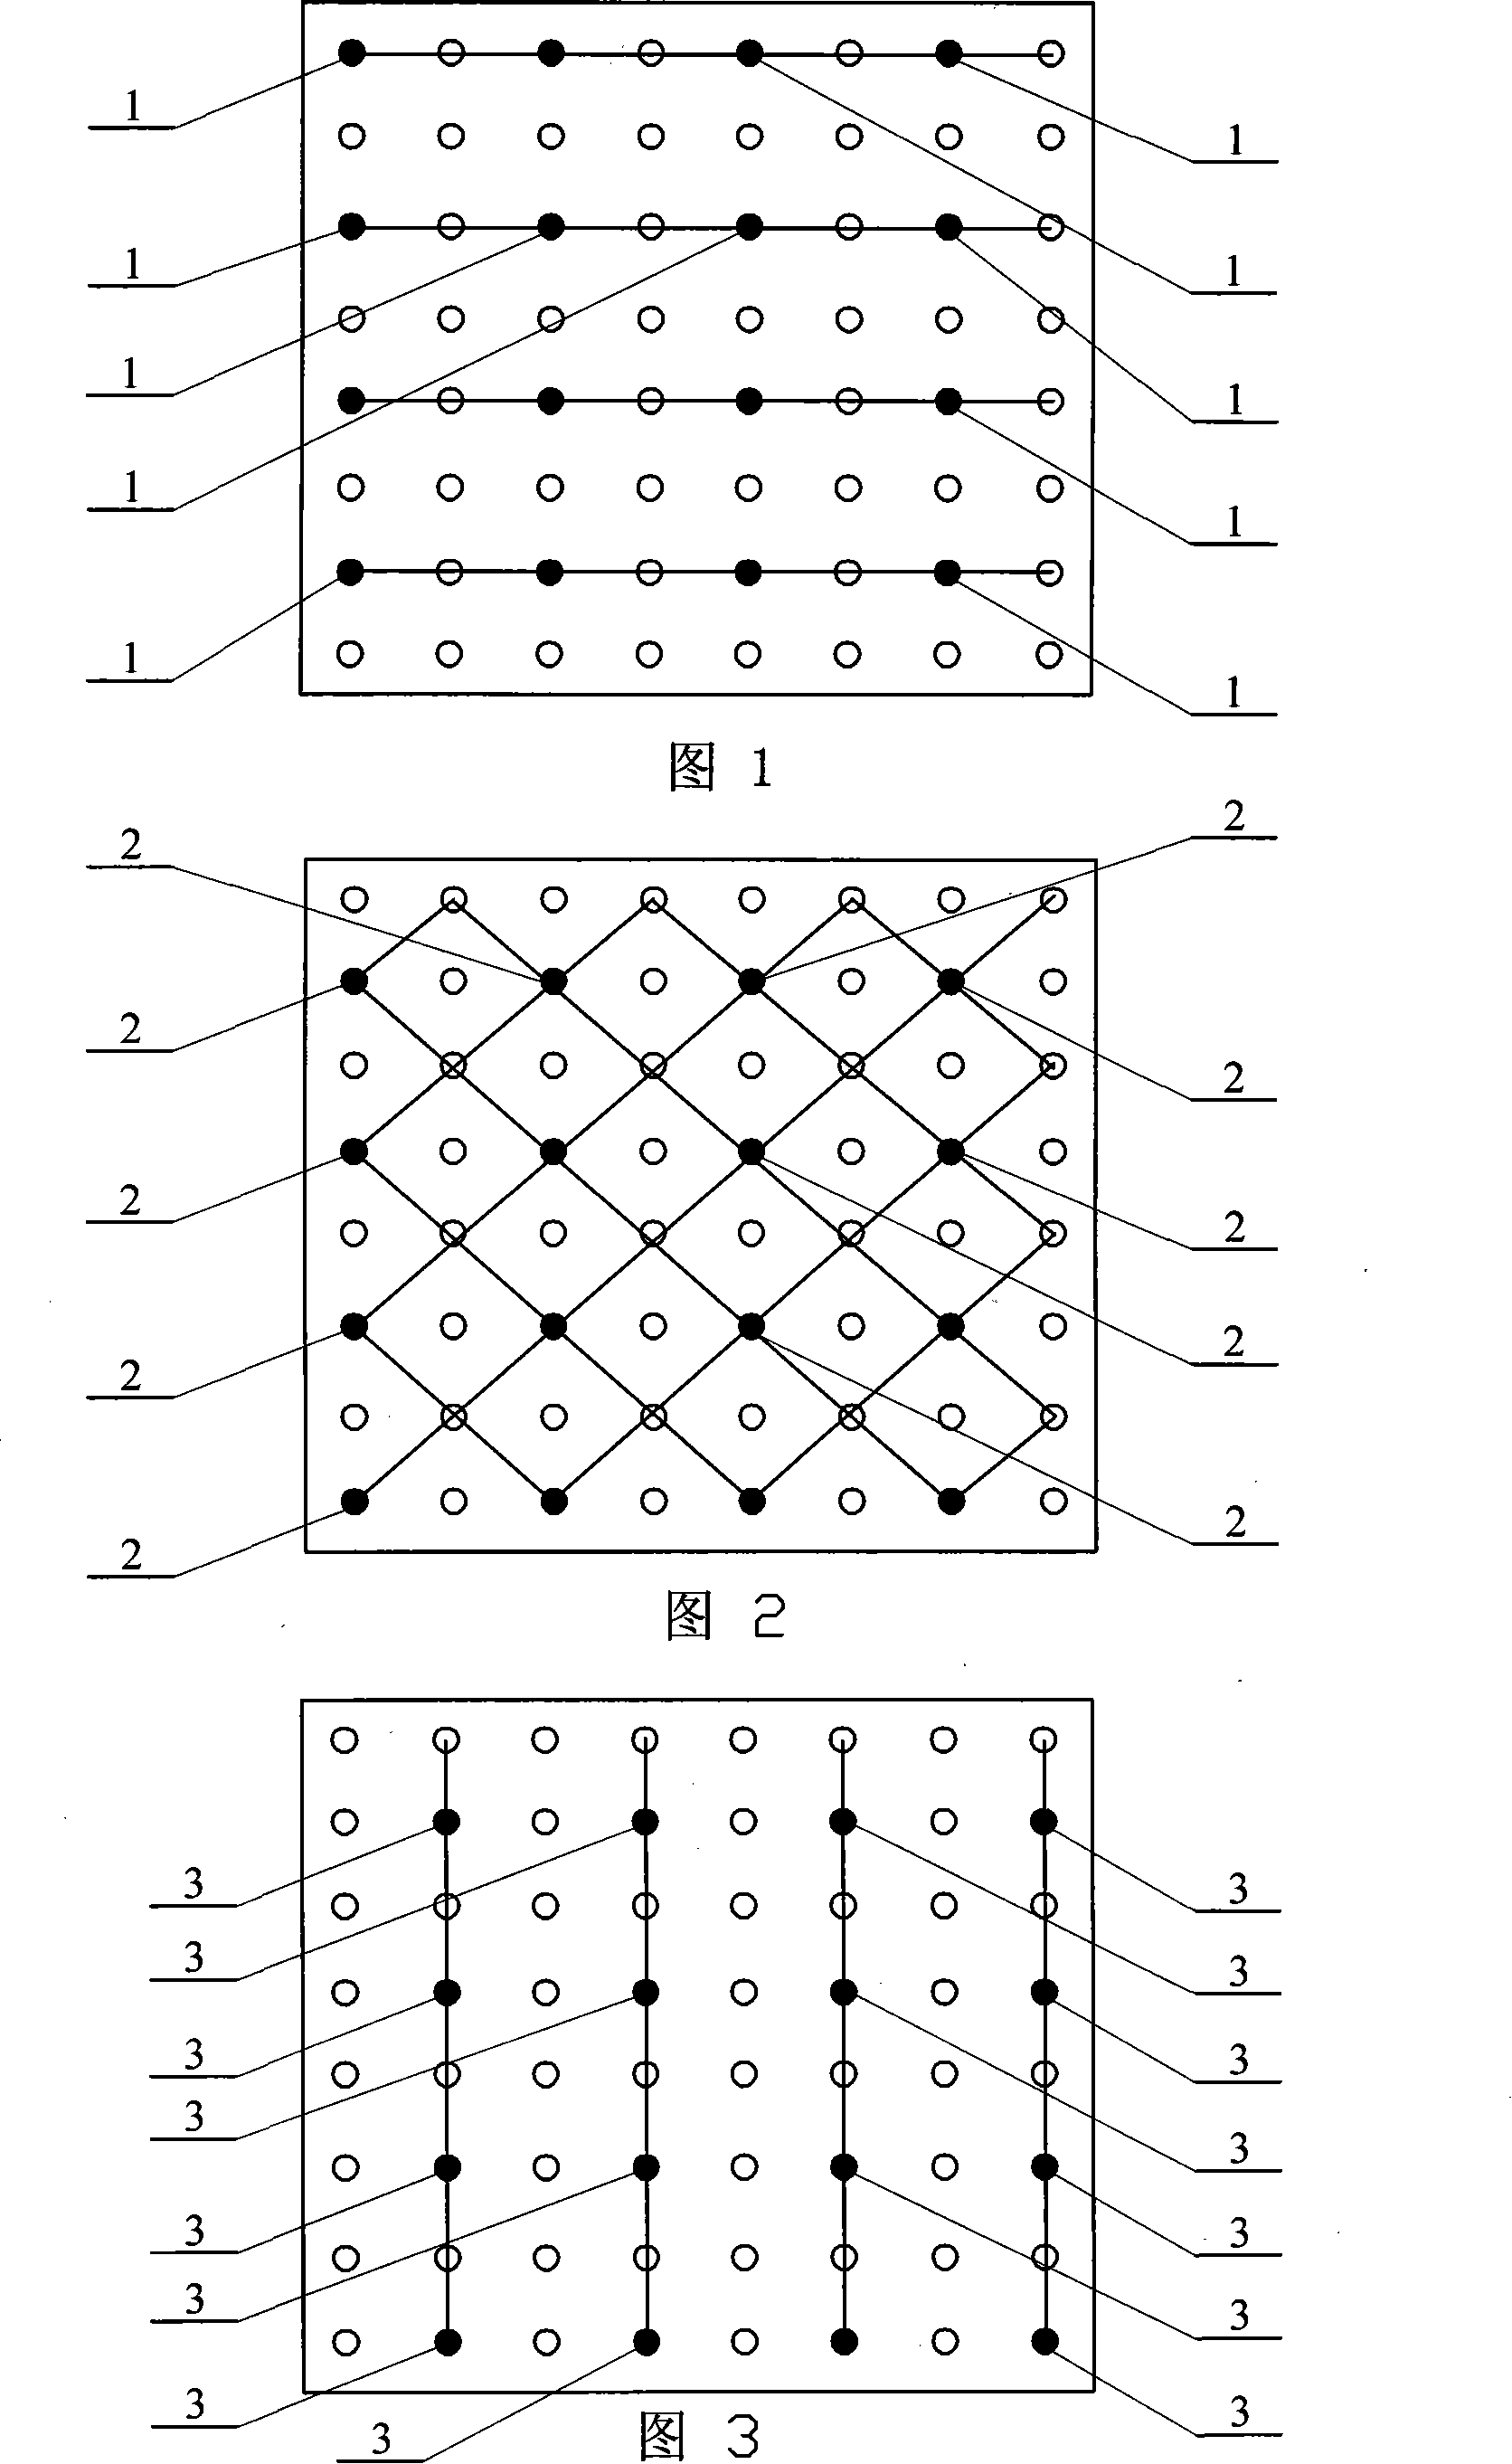 Adjusting method for oil field injection and extraction system in ultra-high water-containing period